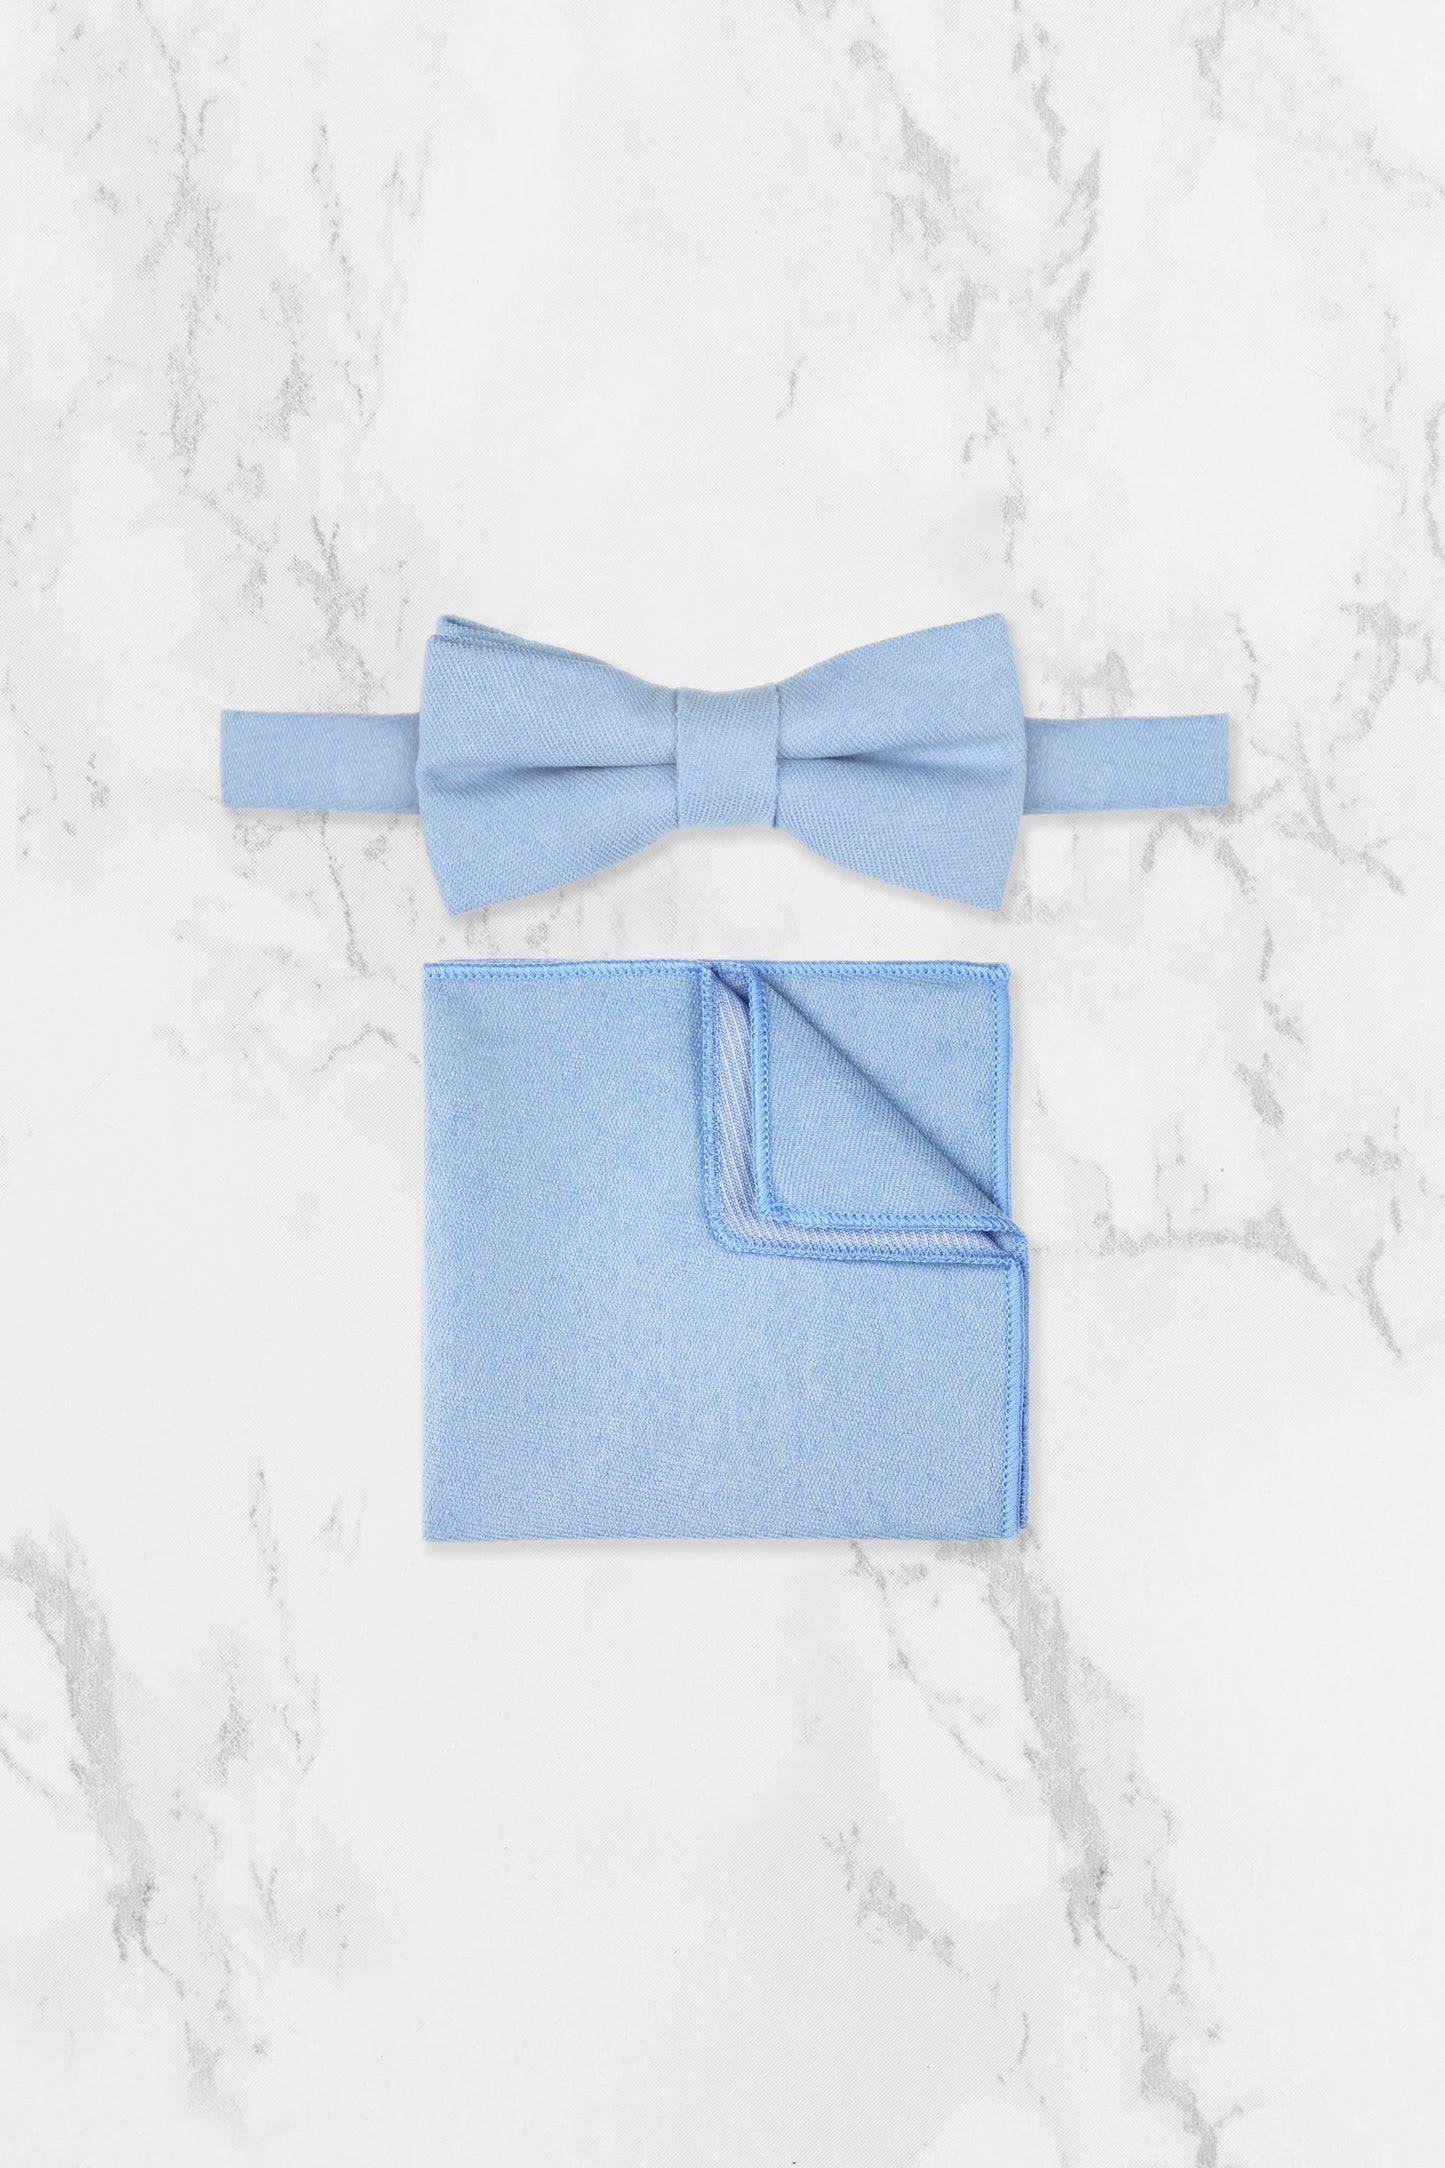 100% Brushed Cotton Suede Bow Tie - Blue